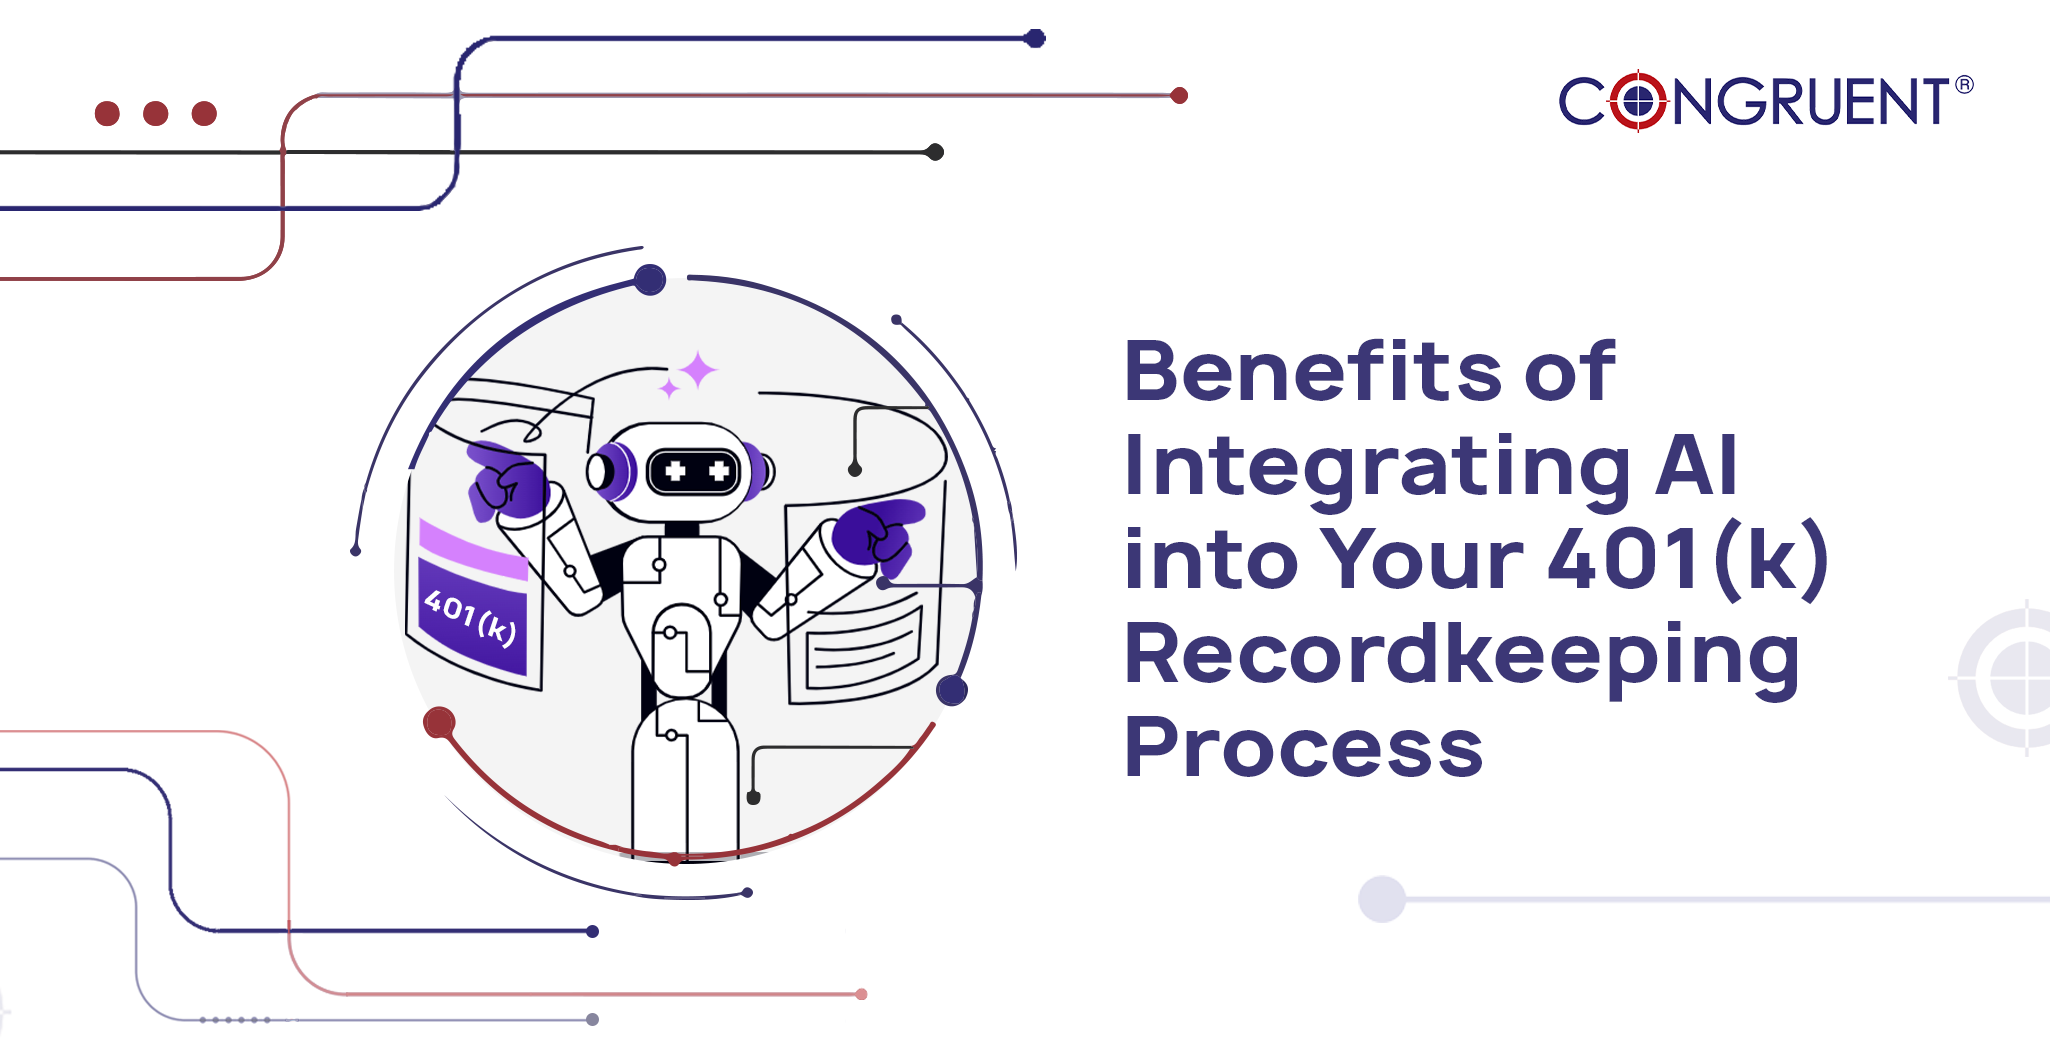 Benefits of Integrating AI into Your 401(k) Recordkeeping Process